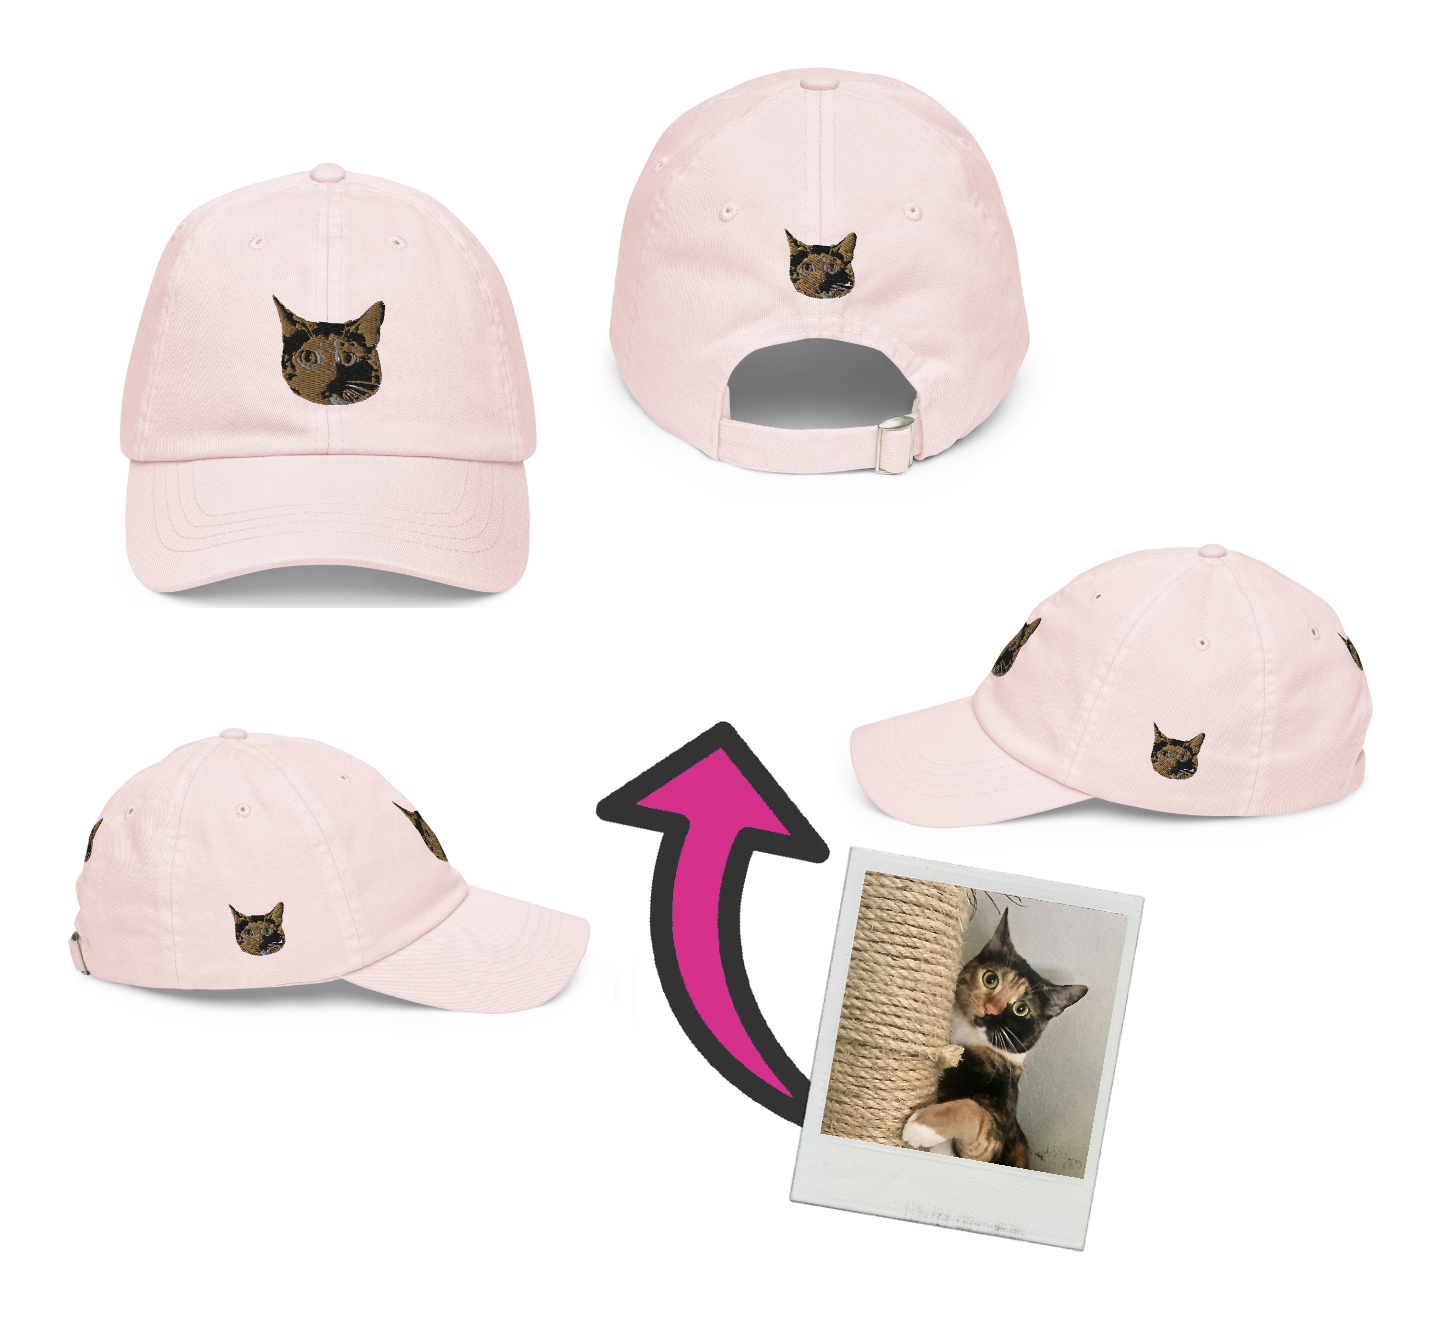 Custom Photo Pastel Embroidered Hat, Personalized Dad Hat, Baseball Cap, Design your own hat, add photo, logo, artwork, 4 sides, gift